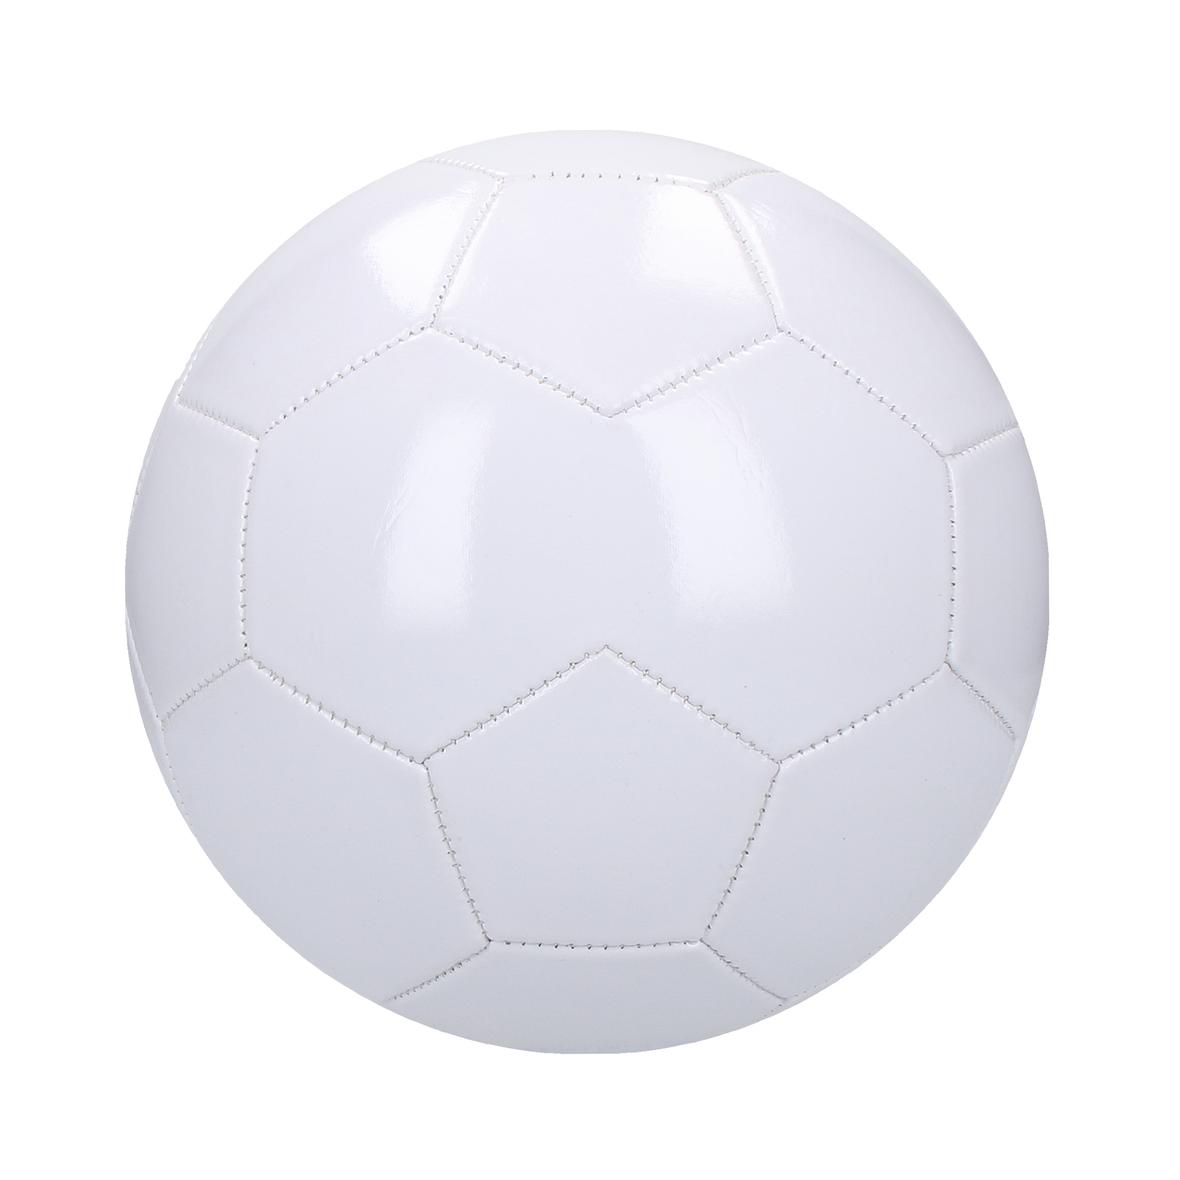 A size 5 football made with 3 layers, PVC material and a latex bladder - Feckenham